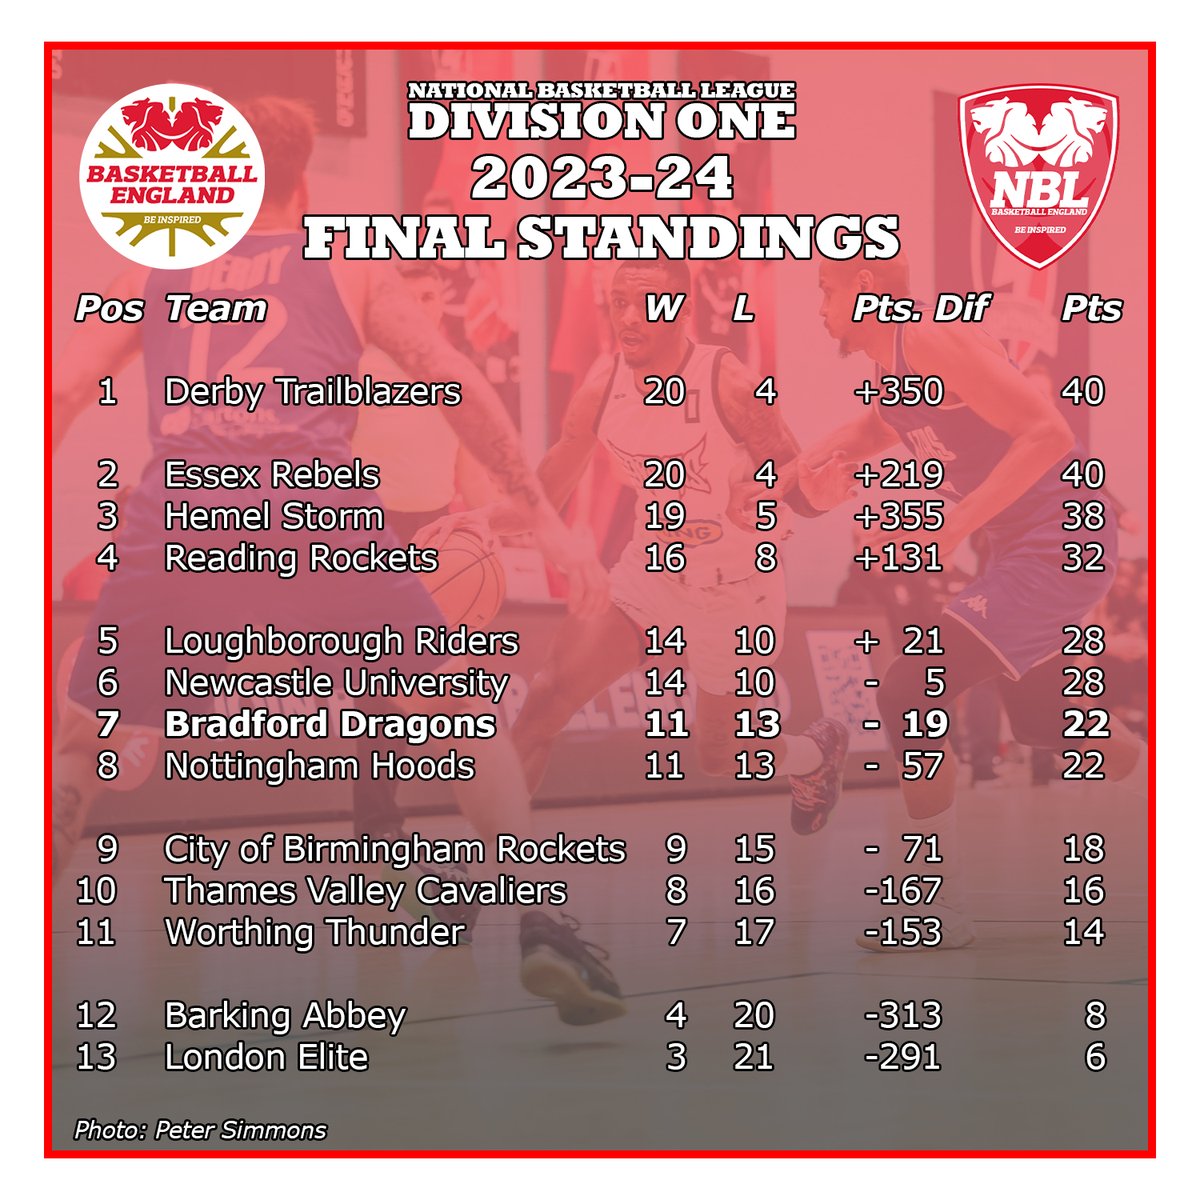 The regular season is now complete and the final table looks like this. 
#BradfordDragons #Basketball #OneClubOneFamily #nbl2324 #FinalStandings